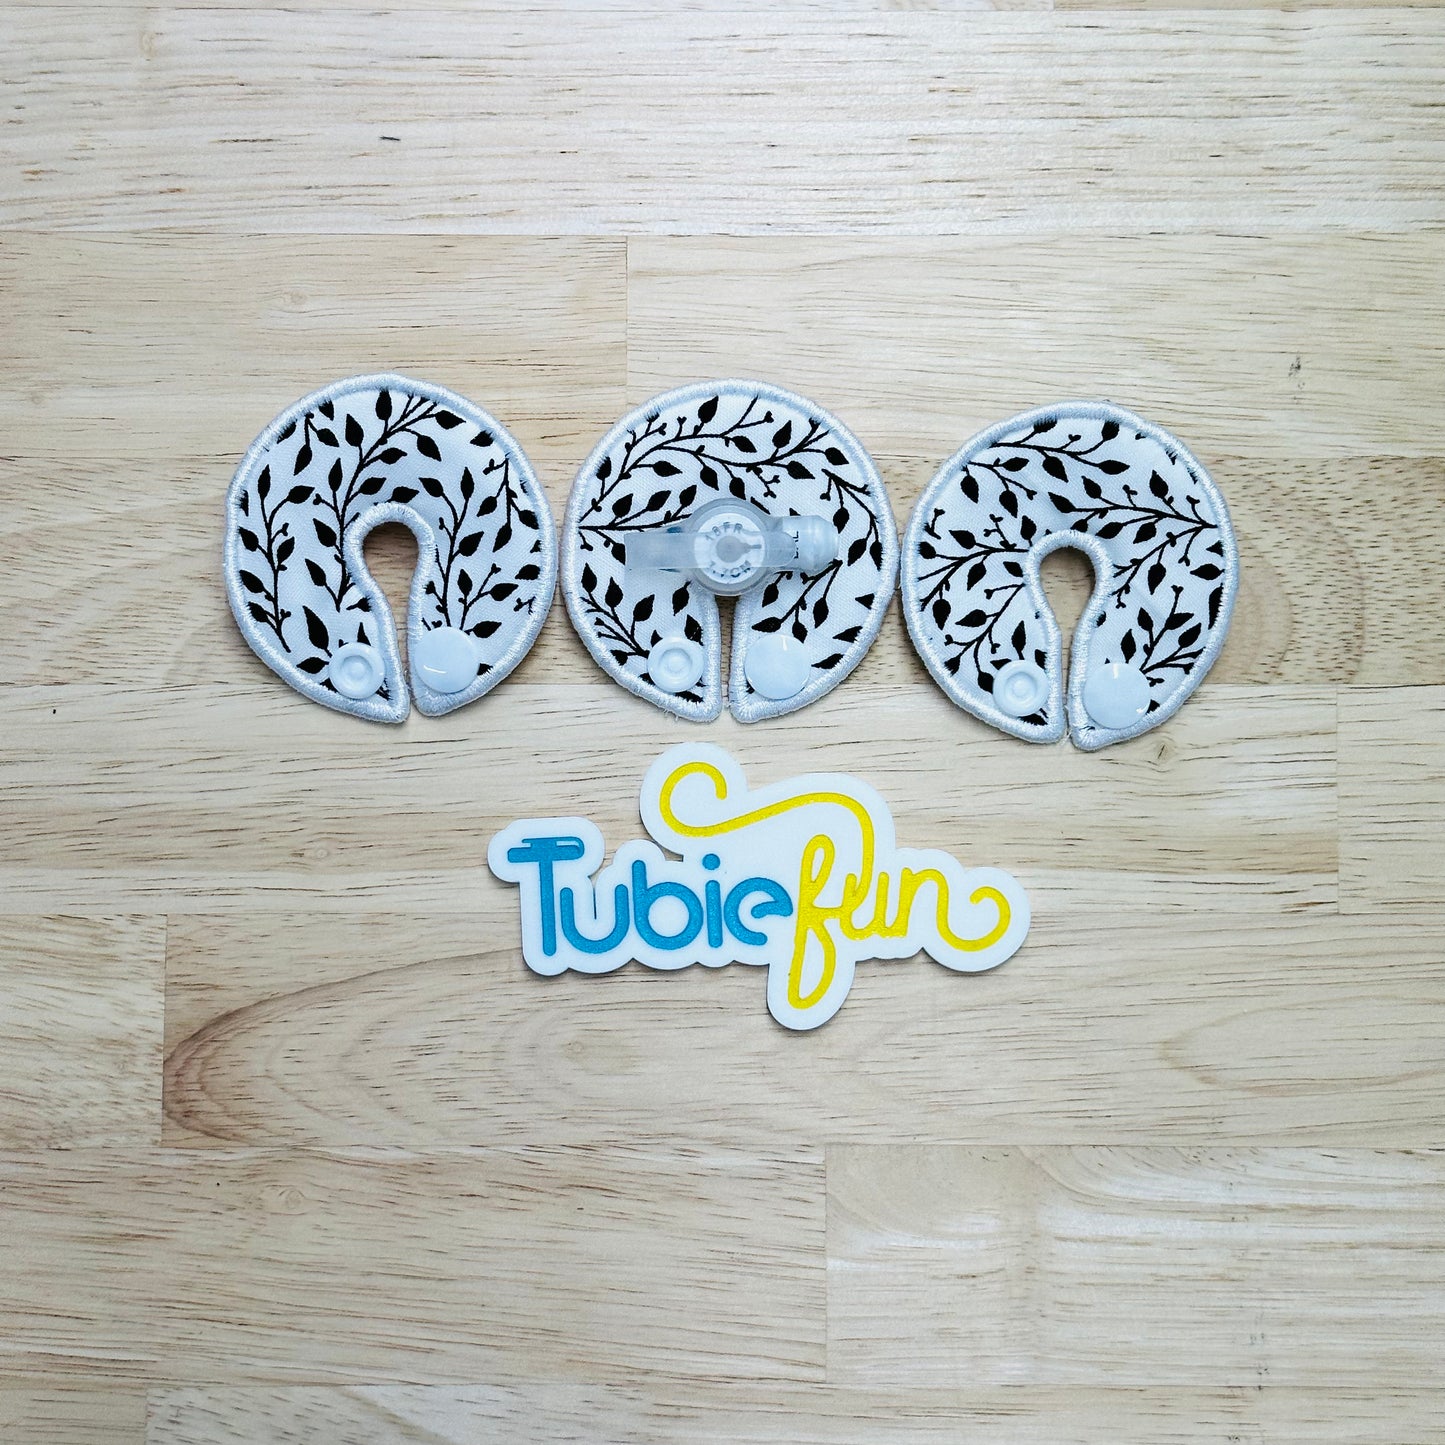 G-Tube Button Pad Cover -  Black Leaves on White